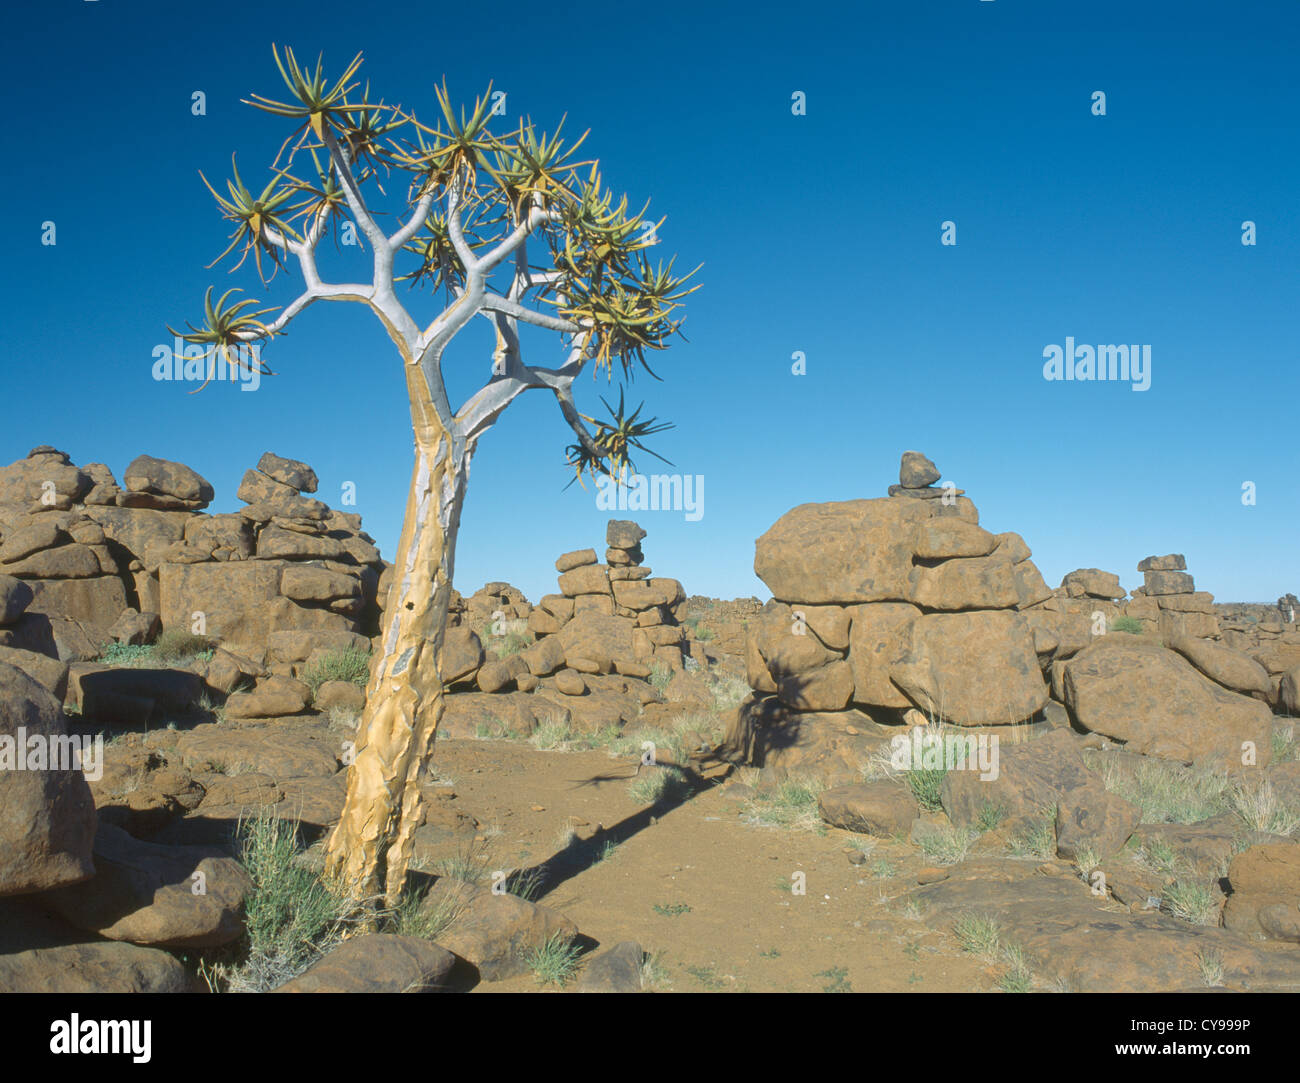 Aloe dichotoma, Quiver Tree. Banque D'Images